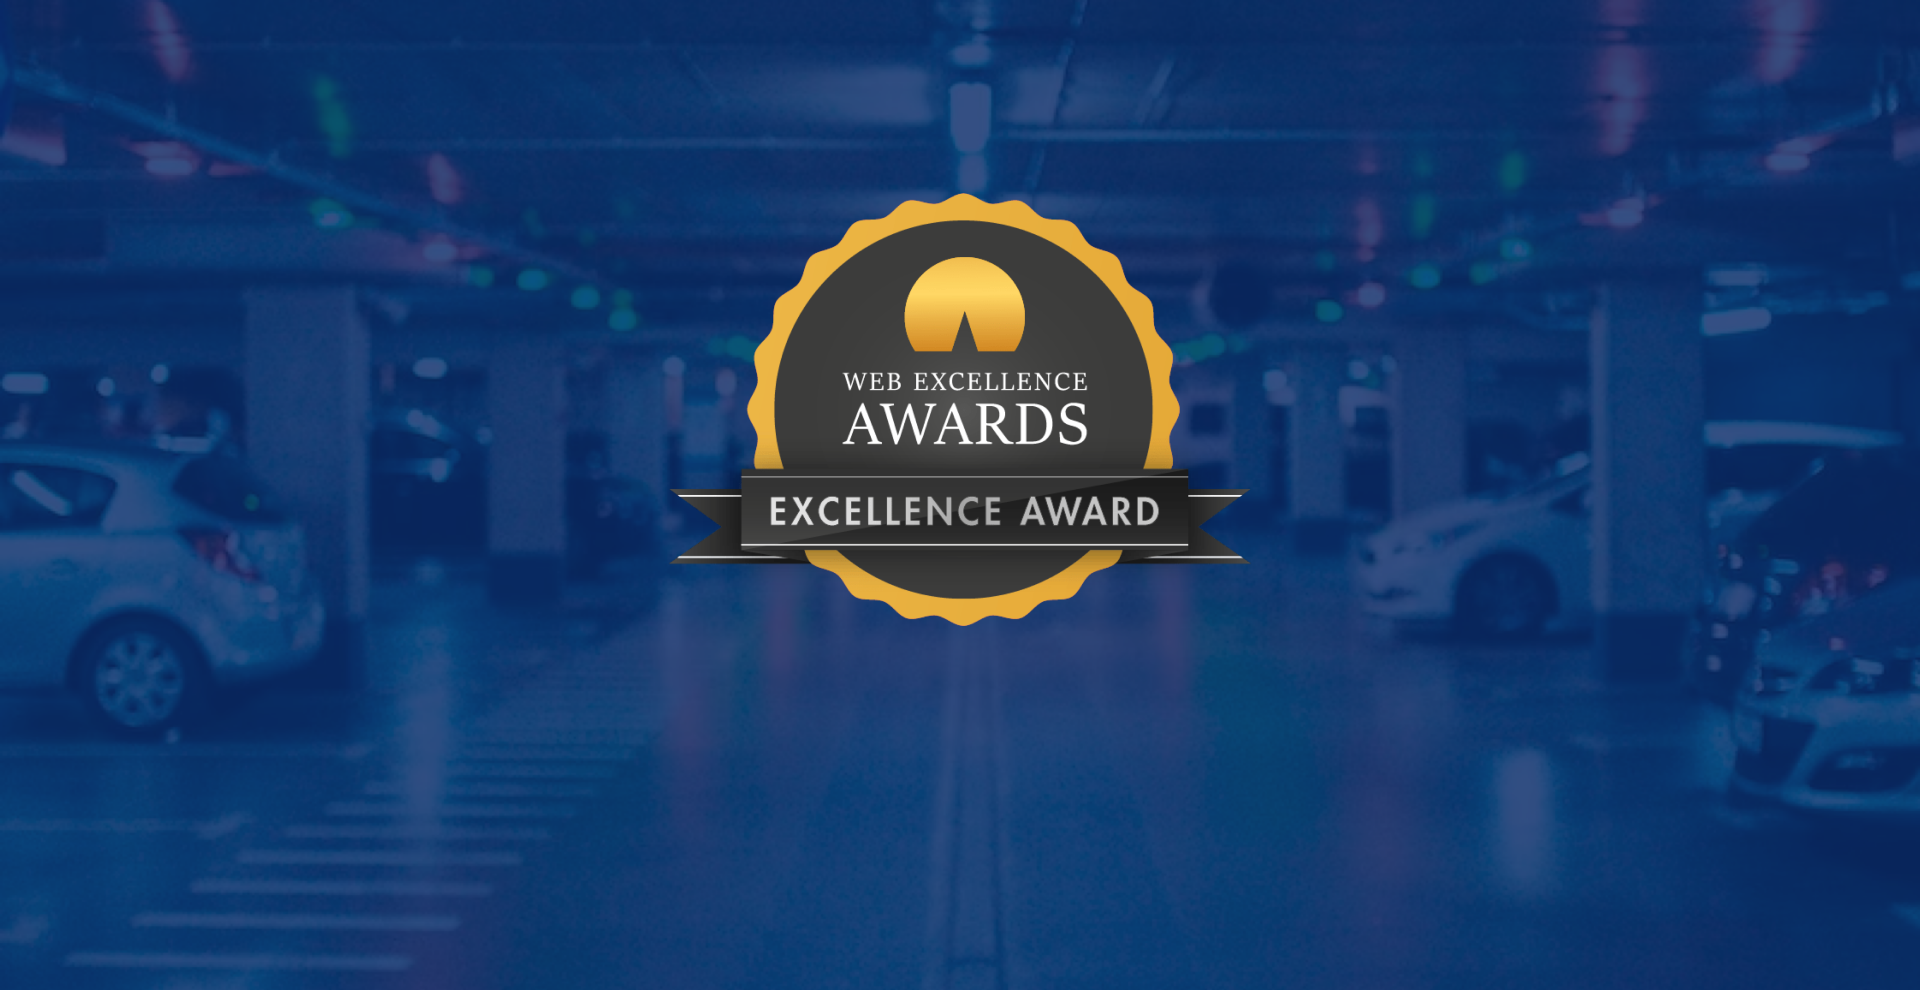 hedgehog lab Wins at the Annual Web Excellence Awards Competition